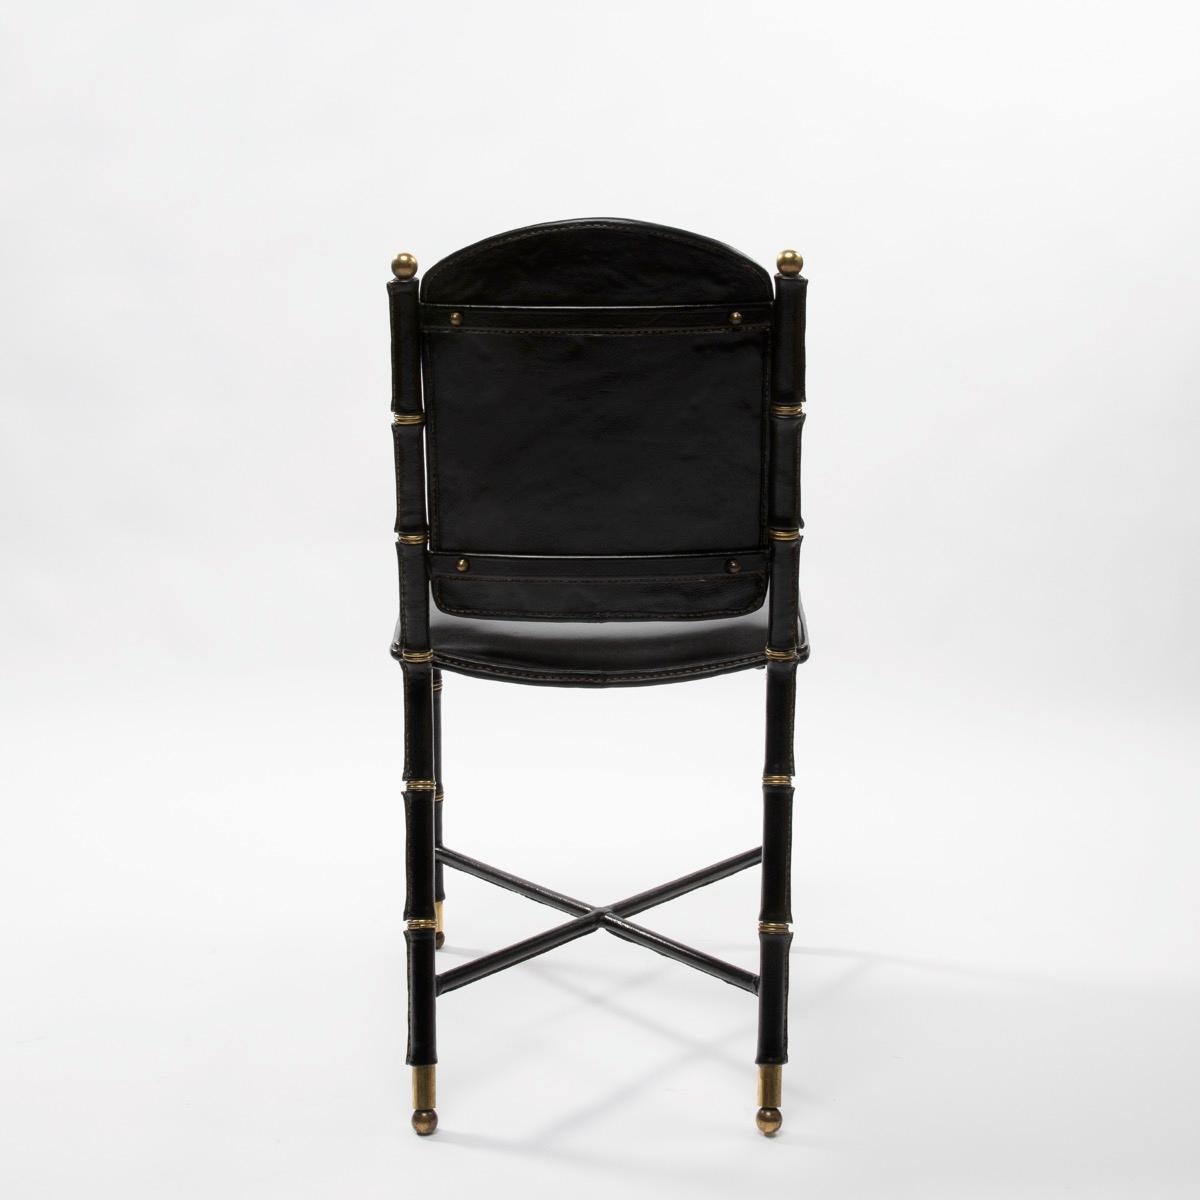 A very elegant set of 6 saddle stitched black leather chairs by Jacques Adnet. The chair consist of a sheathed leather steel frame and a padded seat.
The feet are embellished with bronze accessories. Manufactured by 